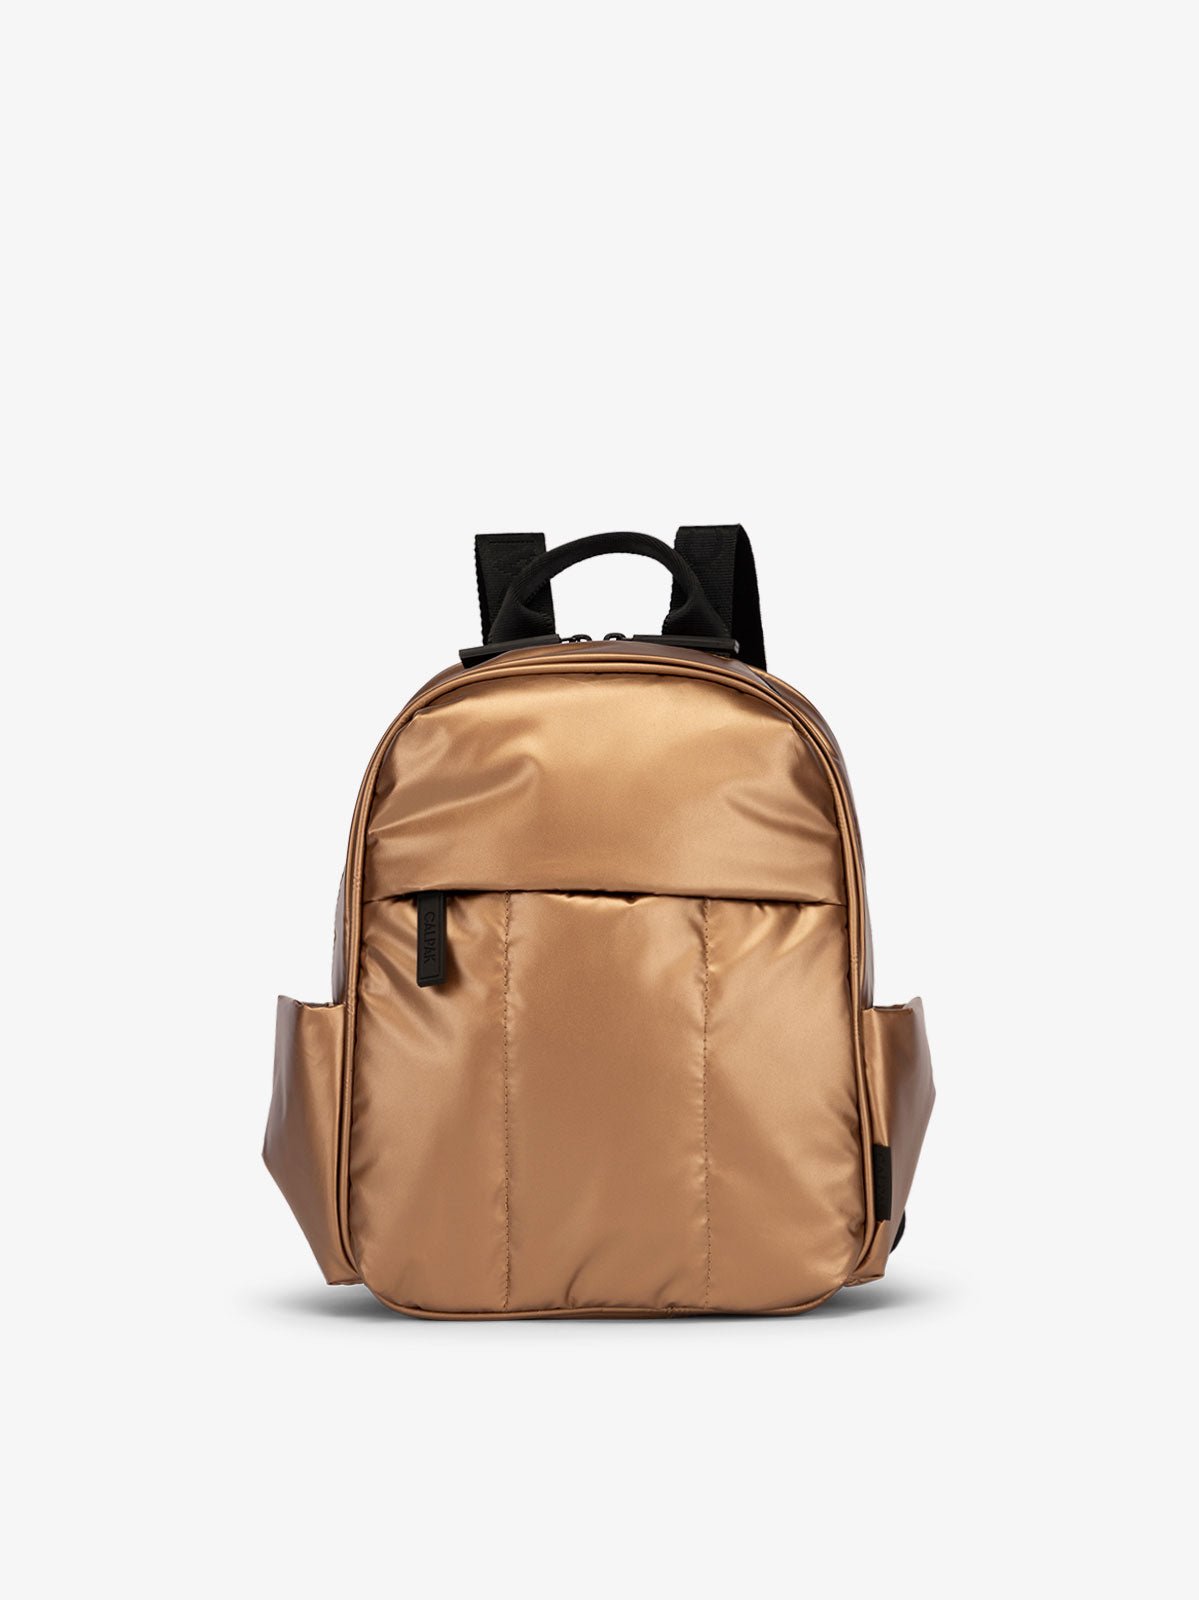 CALPAK Luka Mini Backpack with soft puffy exterior and front zippered pocket in metallic copper